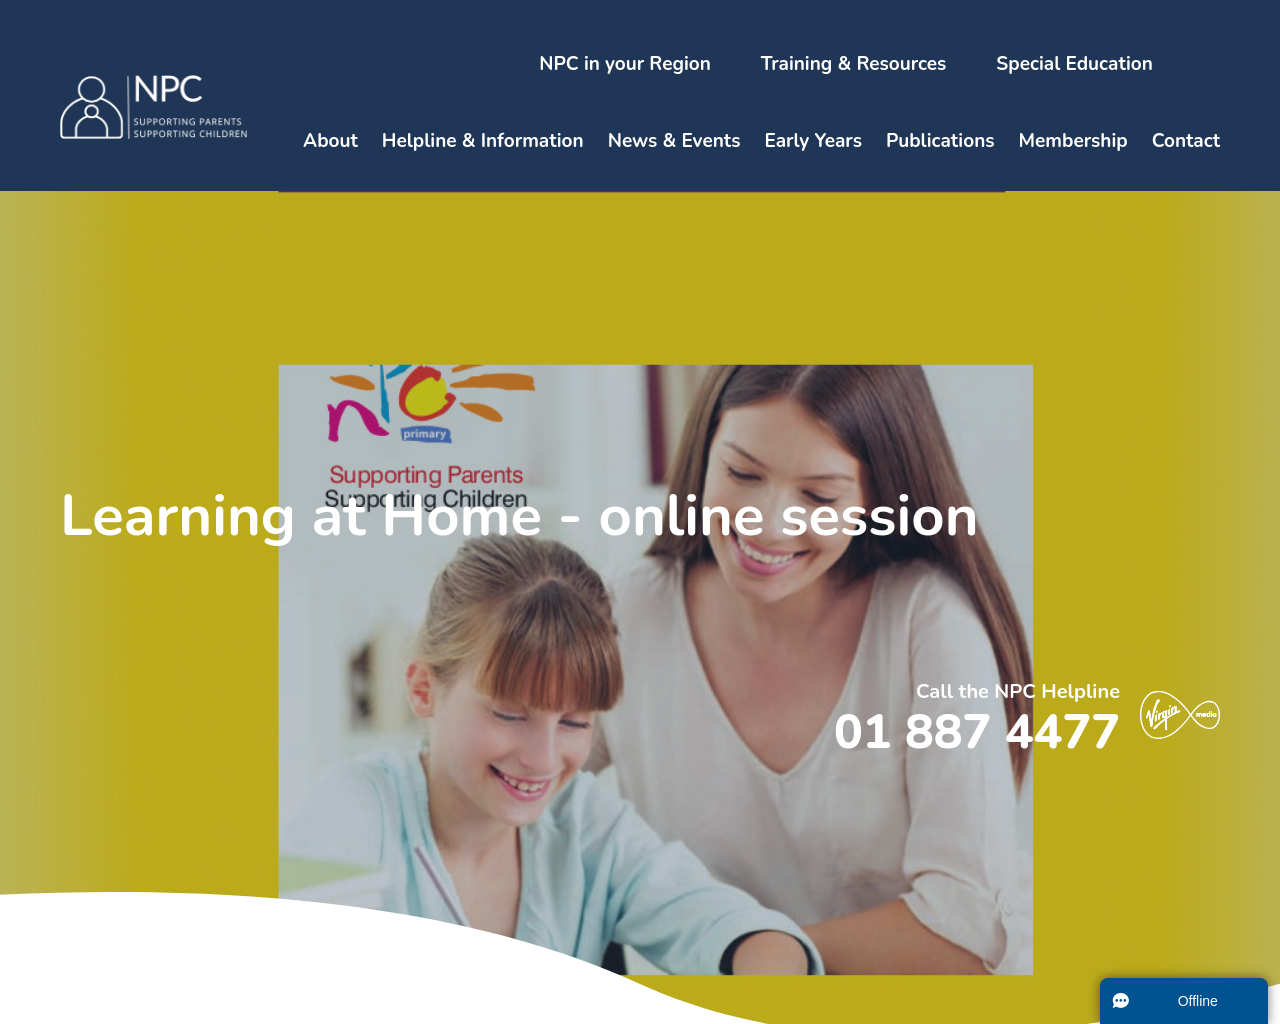 Online learning support from the National Parents Council